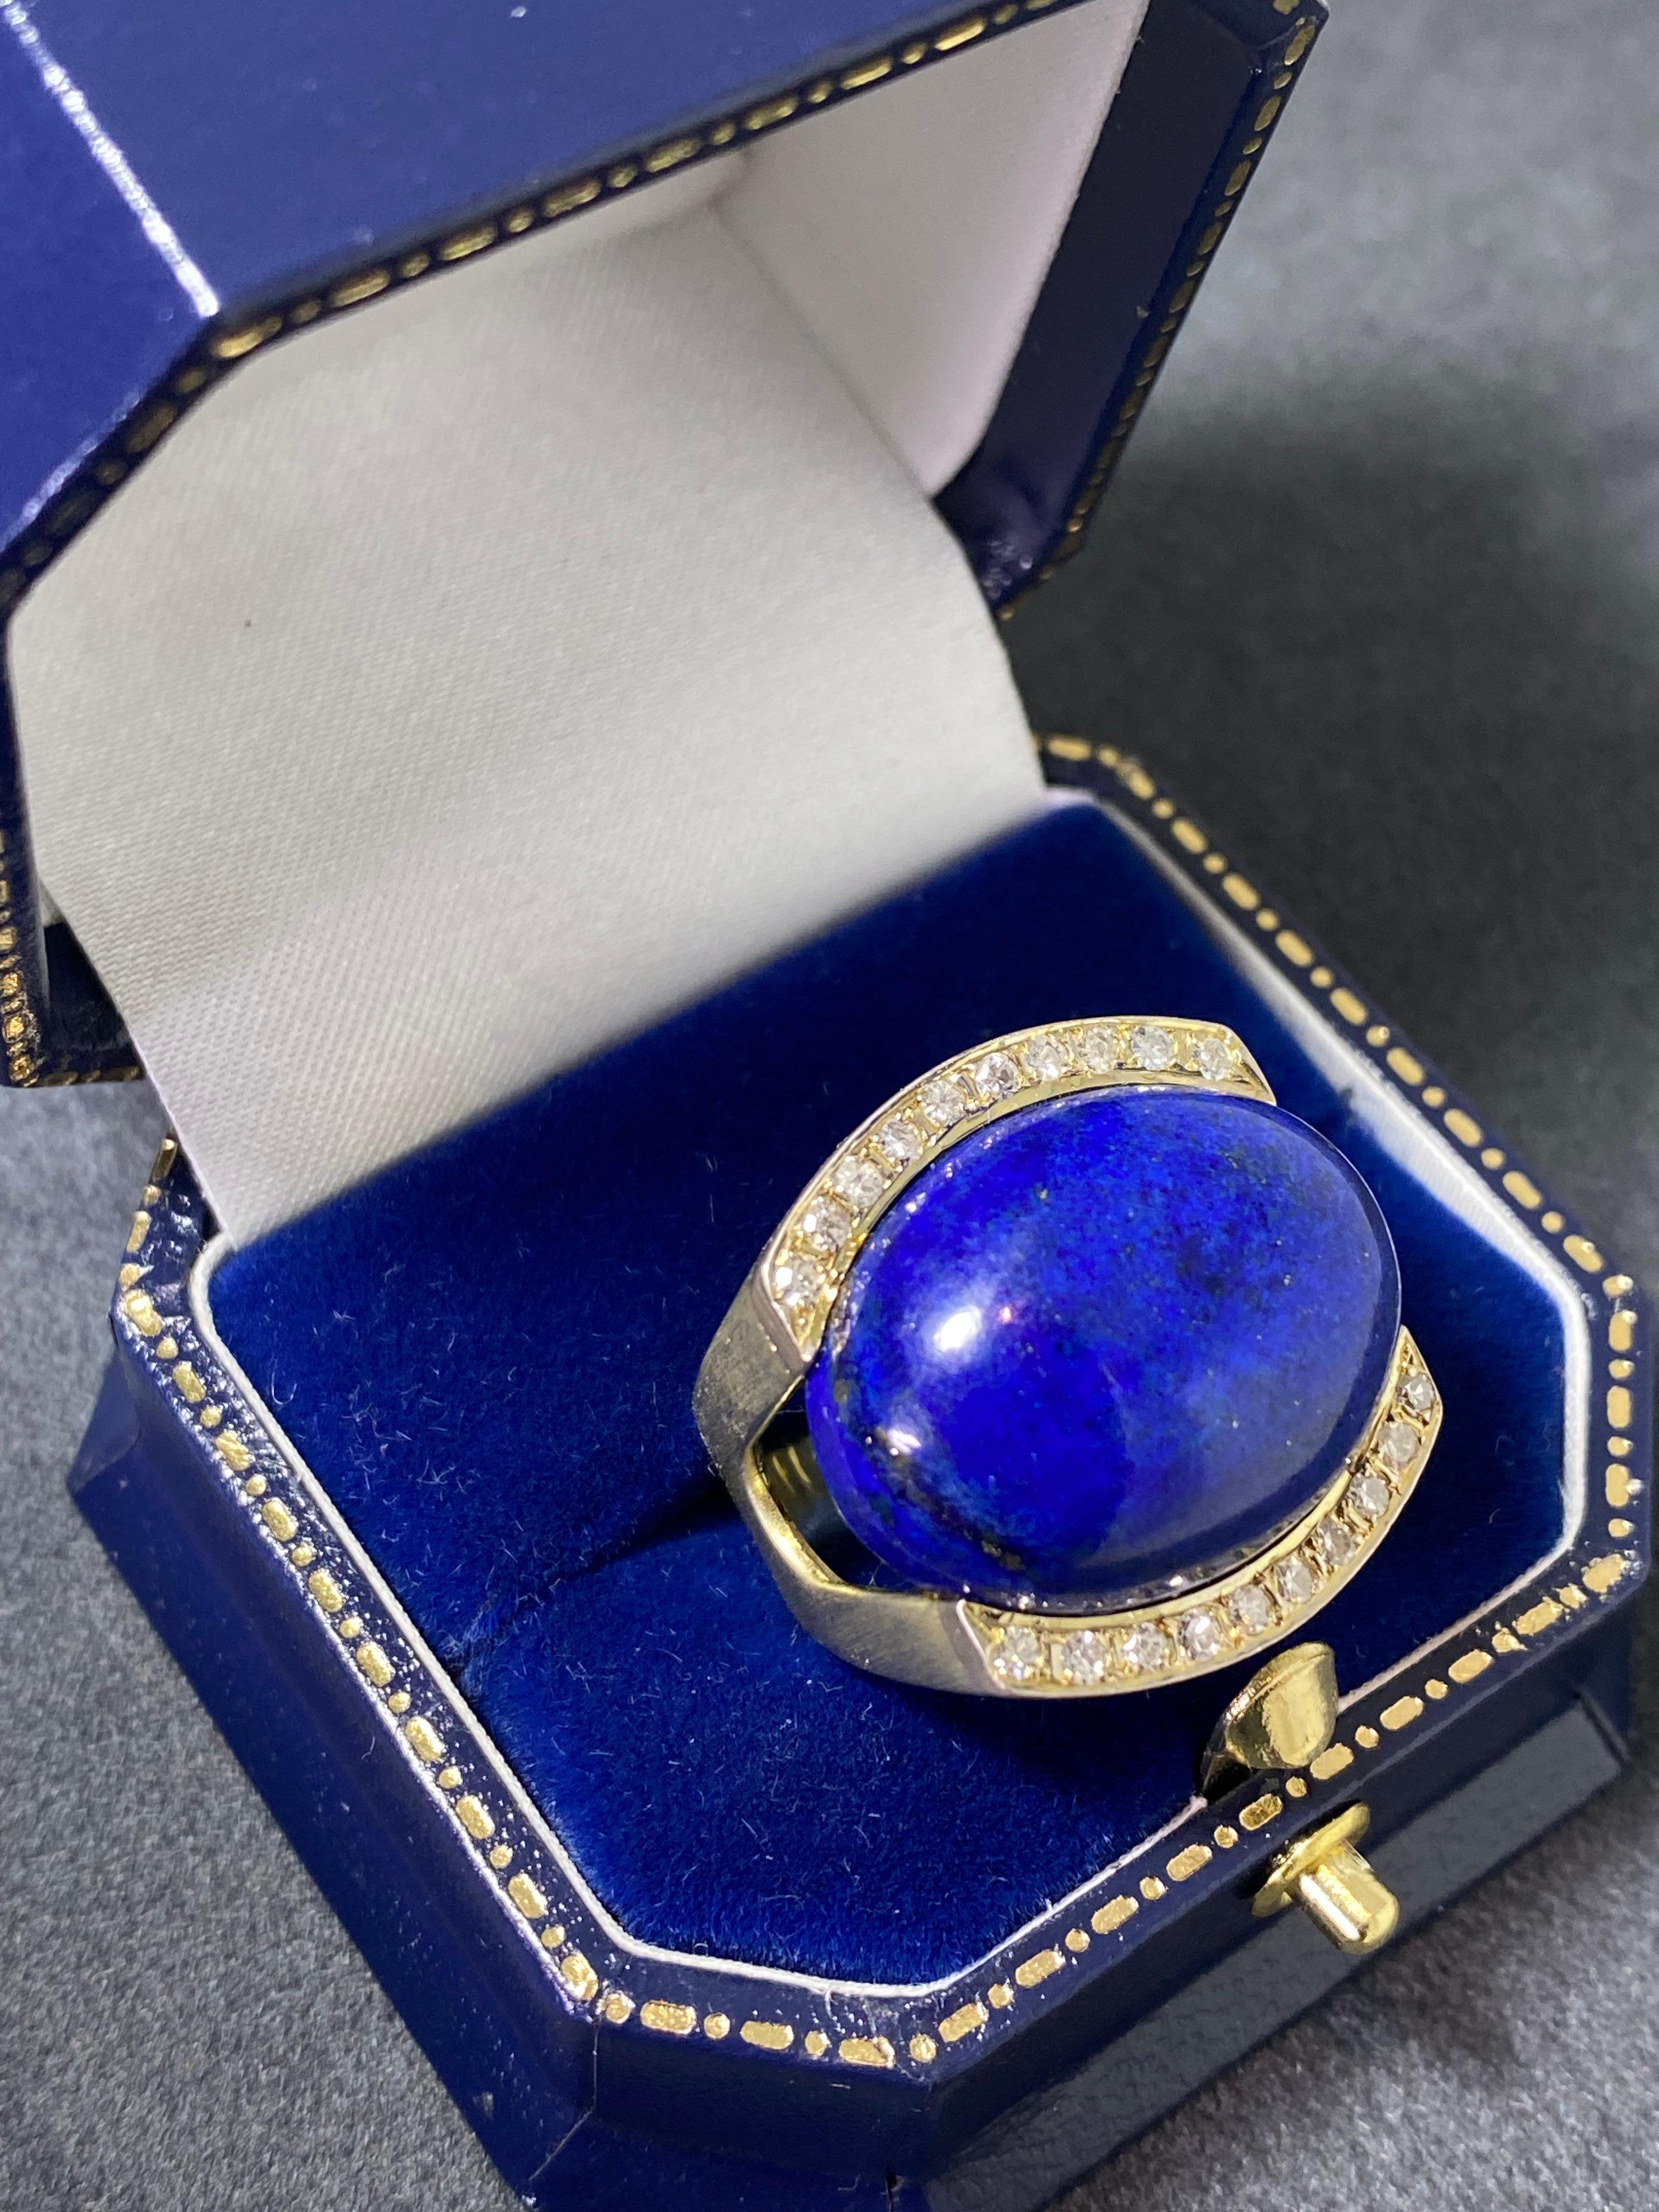 This magnificent handmade piece of Italian provenance will truly make you stand out in a crowd.
Its fabulous design, together with rare & highly sought after gem's size & quality make this piece very special. 

~~~

This Cocktail Ring is featuring